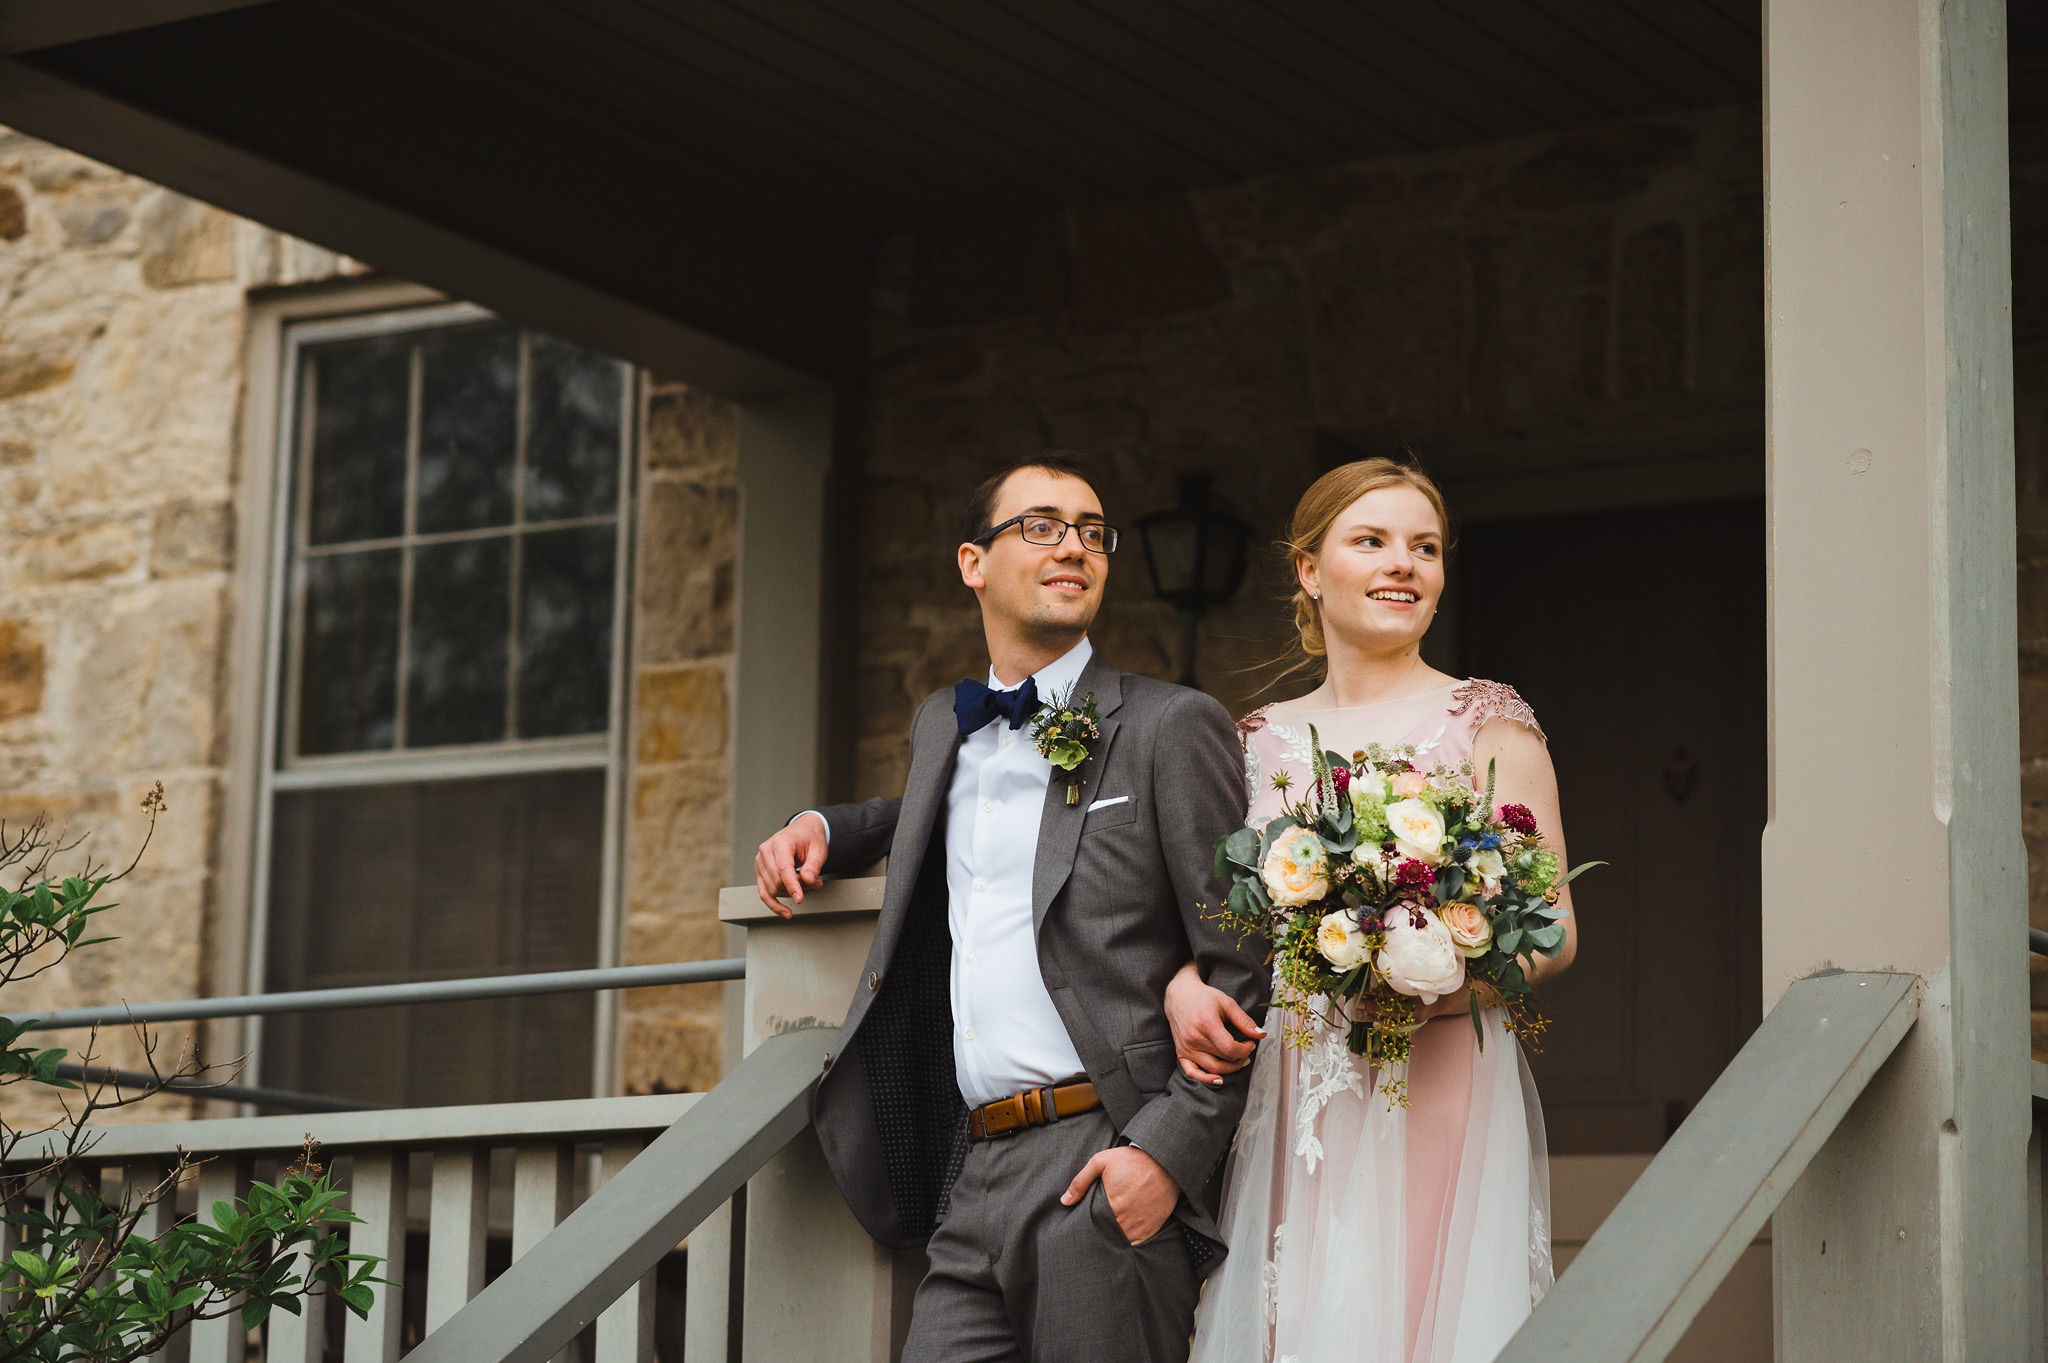 bride holding a colourful floral bouquet and her other arm linked with her grooms during their charming southern style wedding at Ruthven National Historic Site near Hamilton